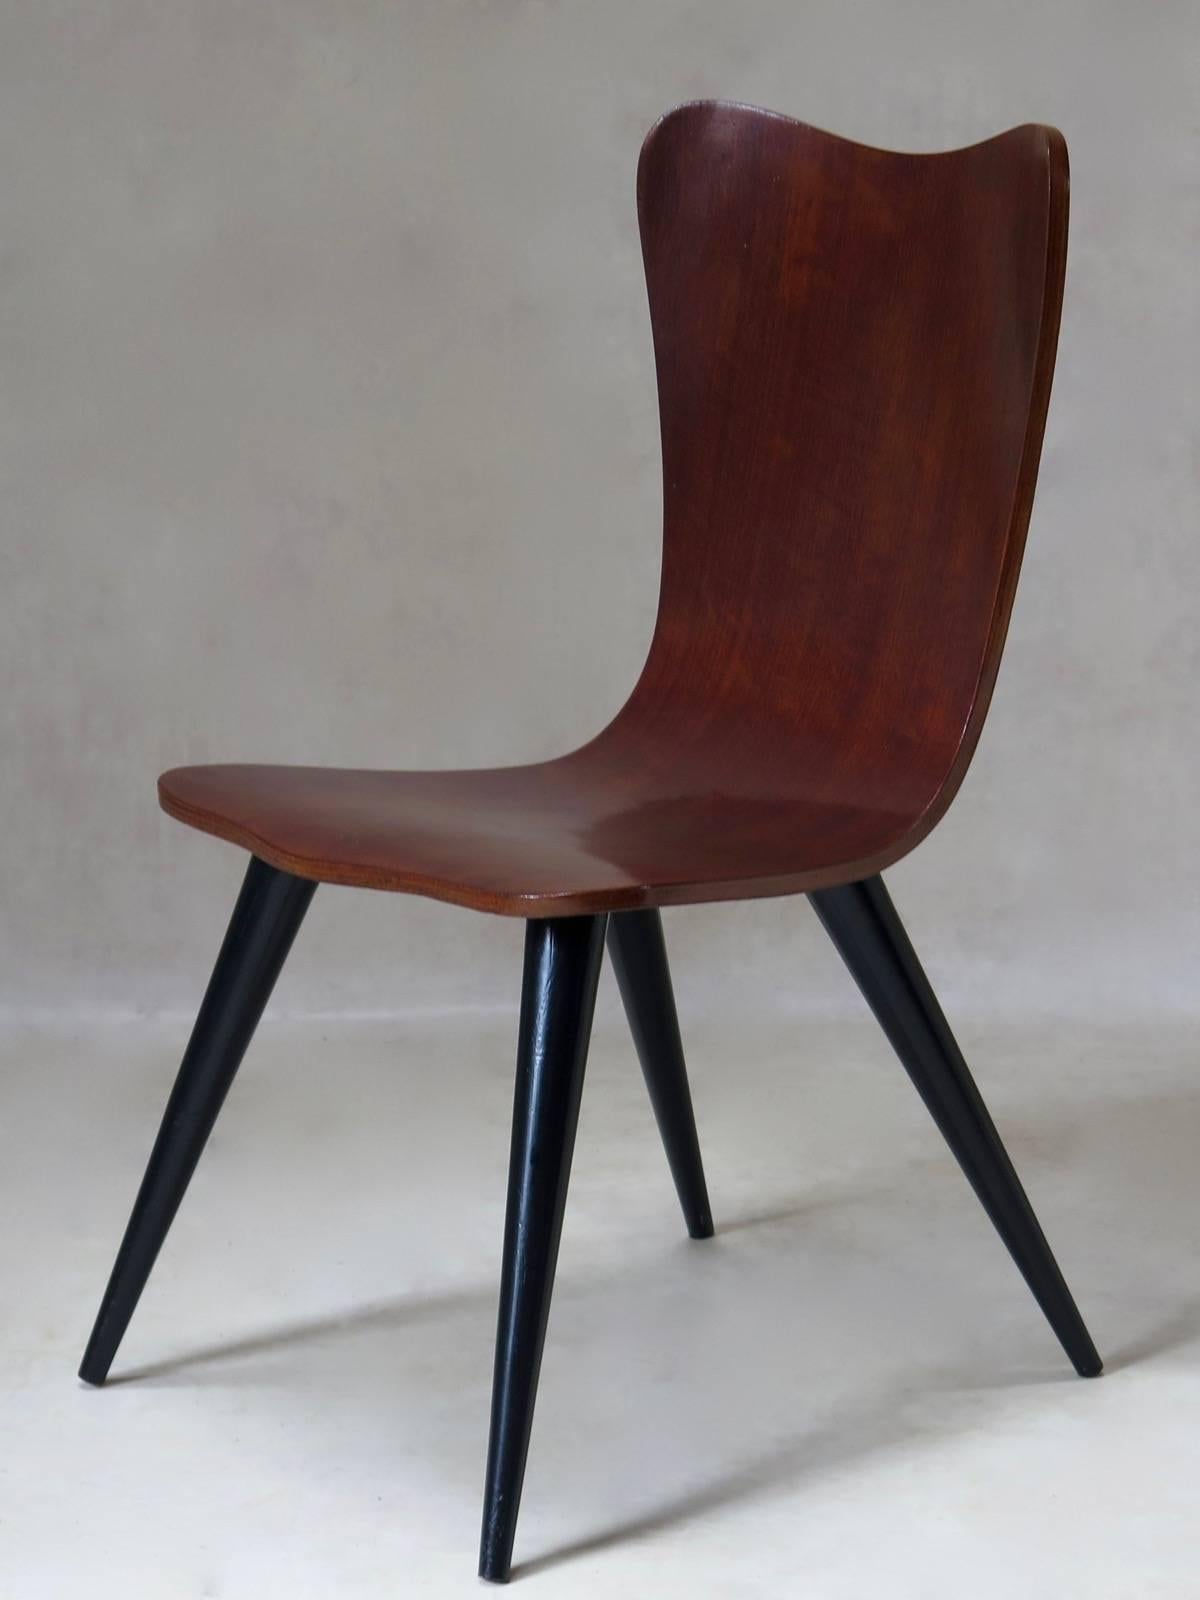 1950s chairs